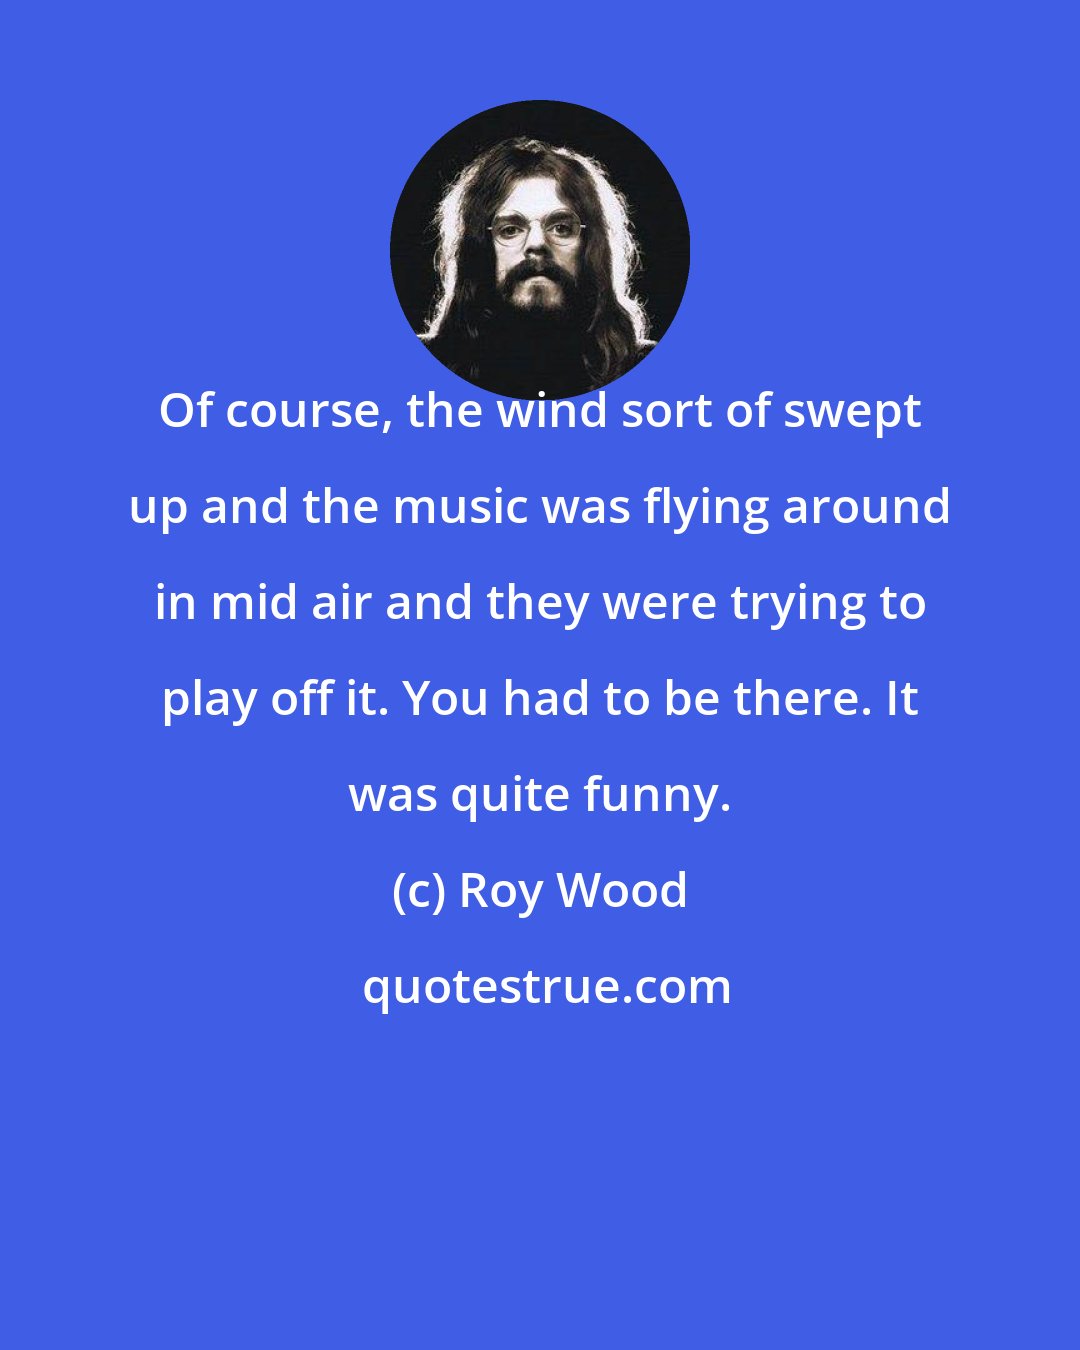 Roy Wood: Of course, the wind sort of swept up and the music was flying around in mid air and they were trying to play off it. You had to be there. It was quite funny.